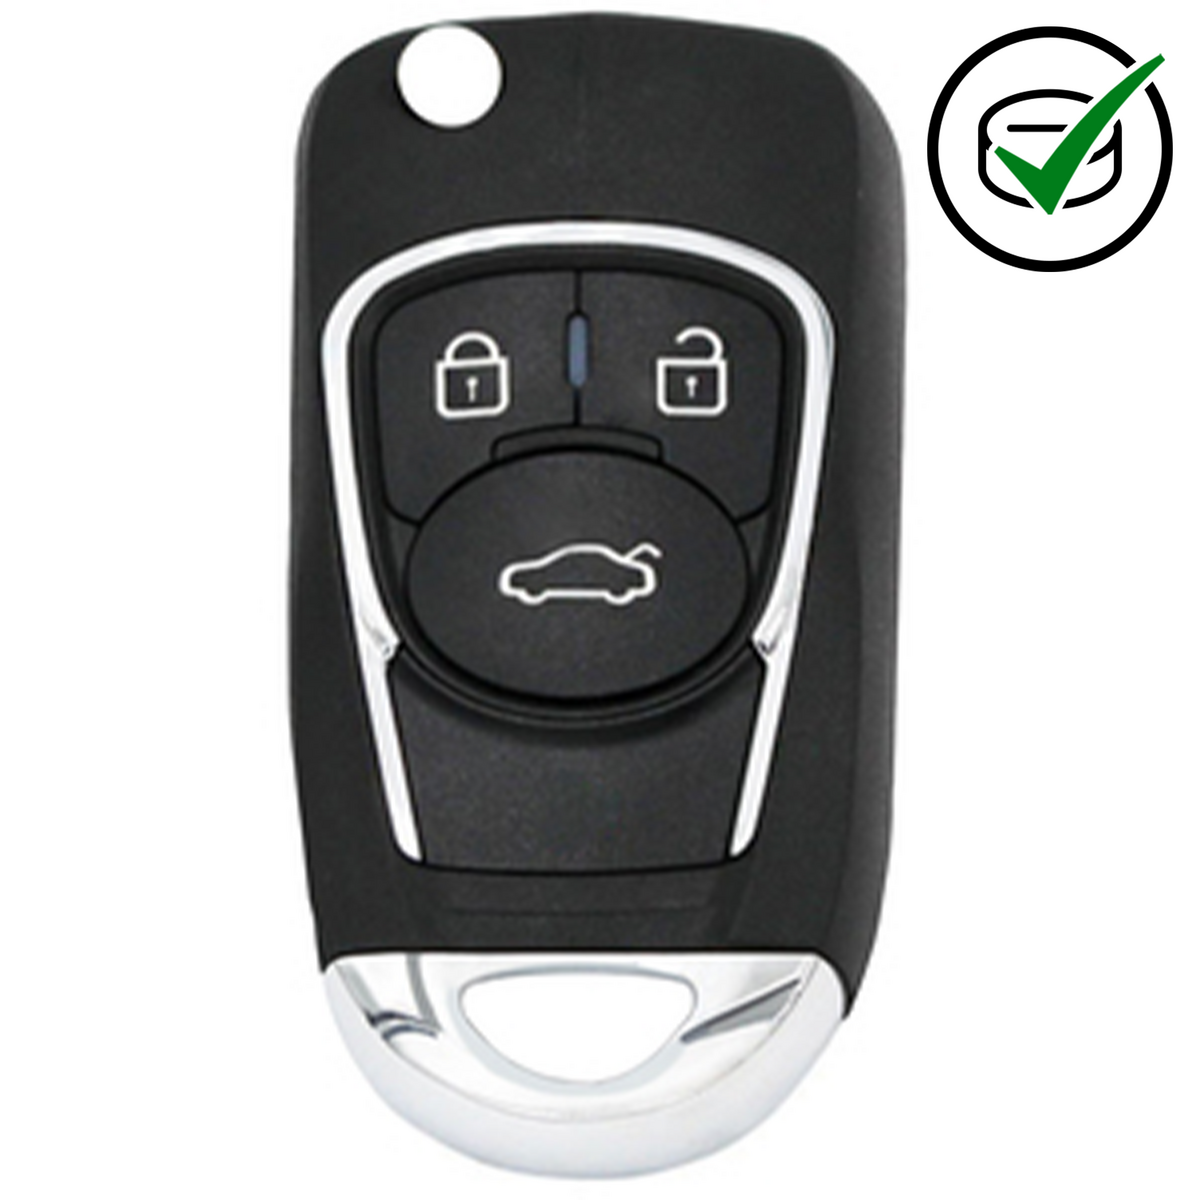 KD 900 Key remote 3 button GM Style Universal with Integrated Transponder Chip